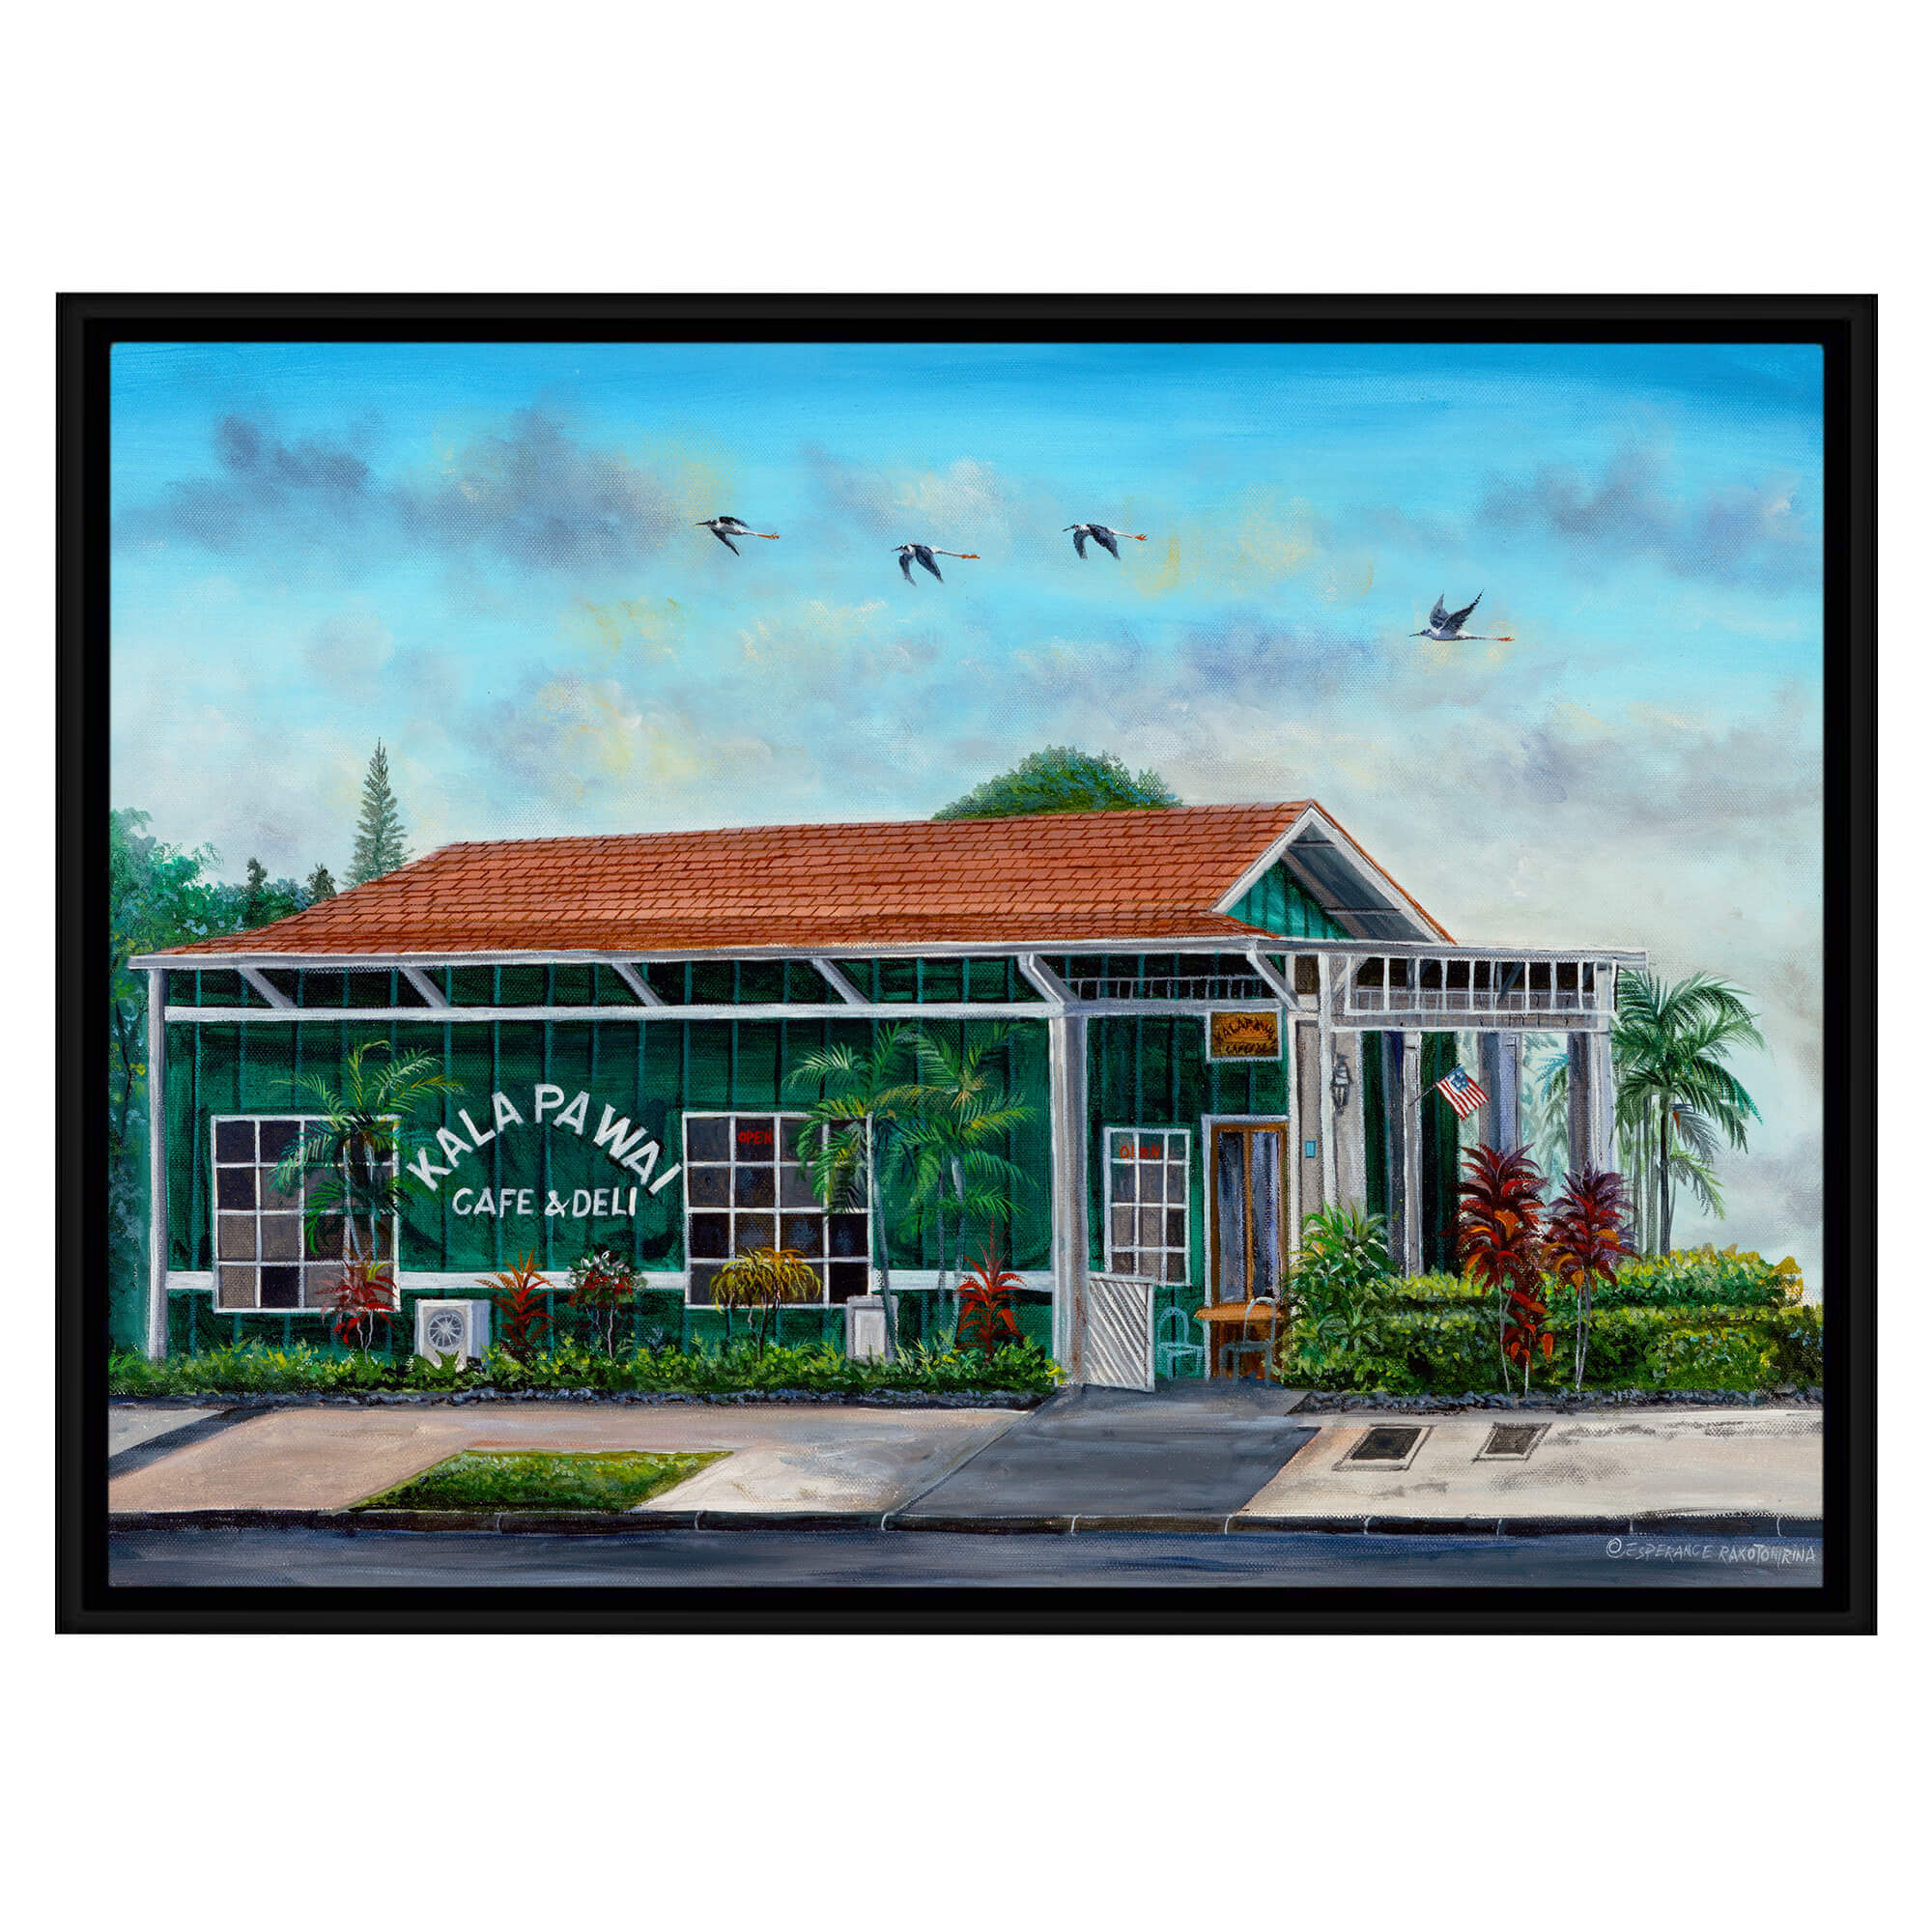 Canvas art print featuring a cafe surrounded by colorful plants by hawaii artist Esperance Rakotonirina